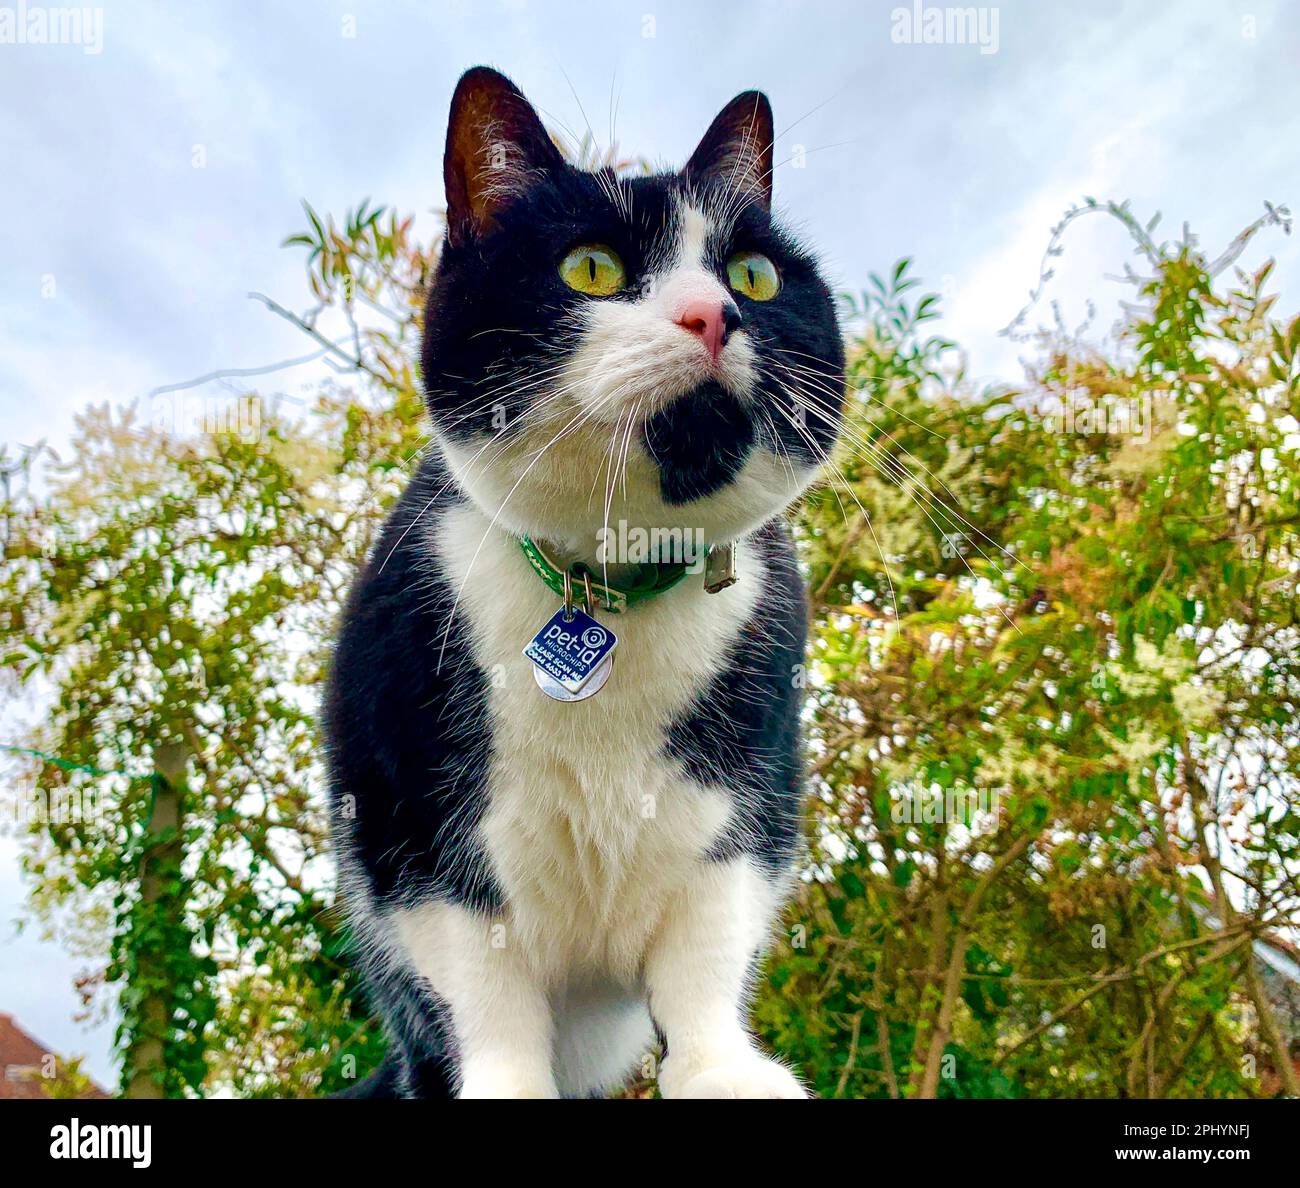 Looking up at a cat. Stock Photo